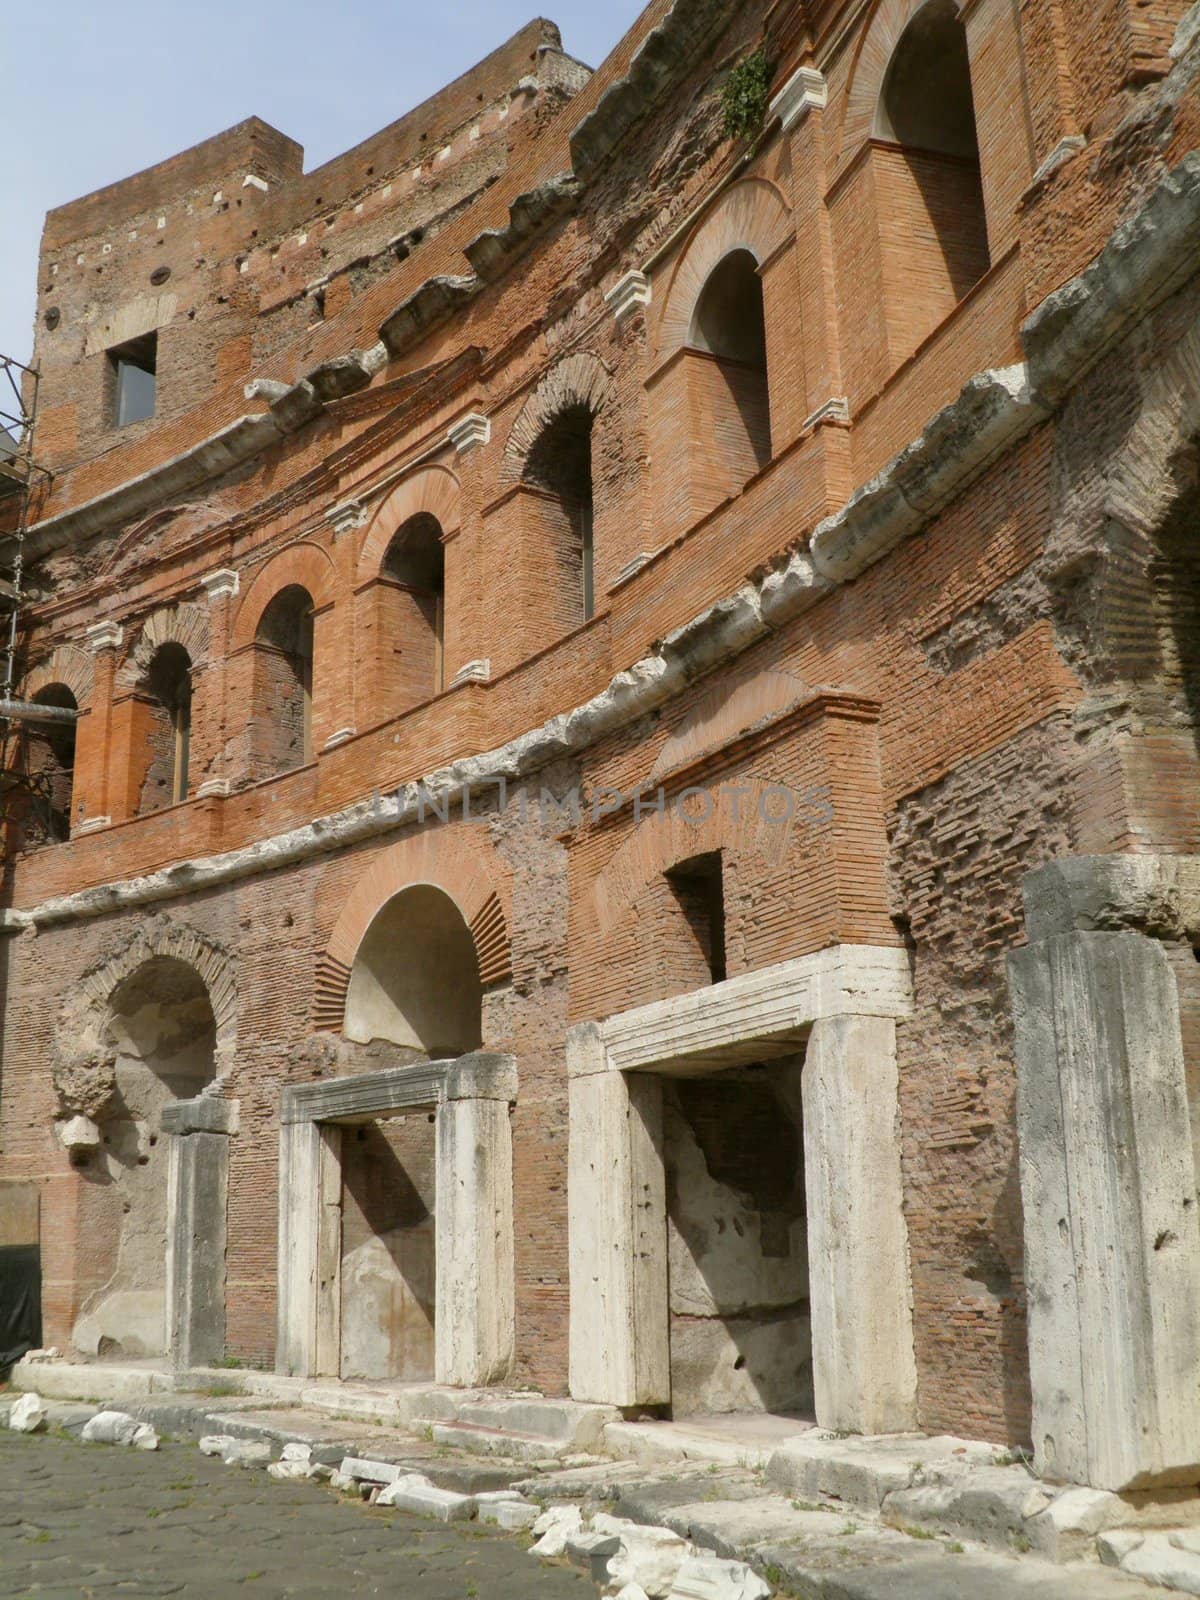 Trajan's forum and market in Rome by paolo77